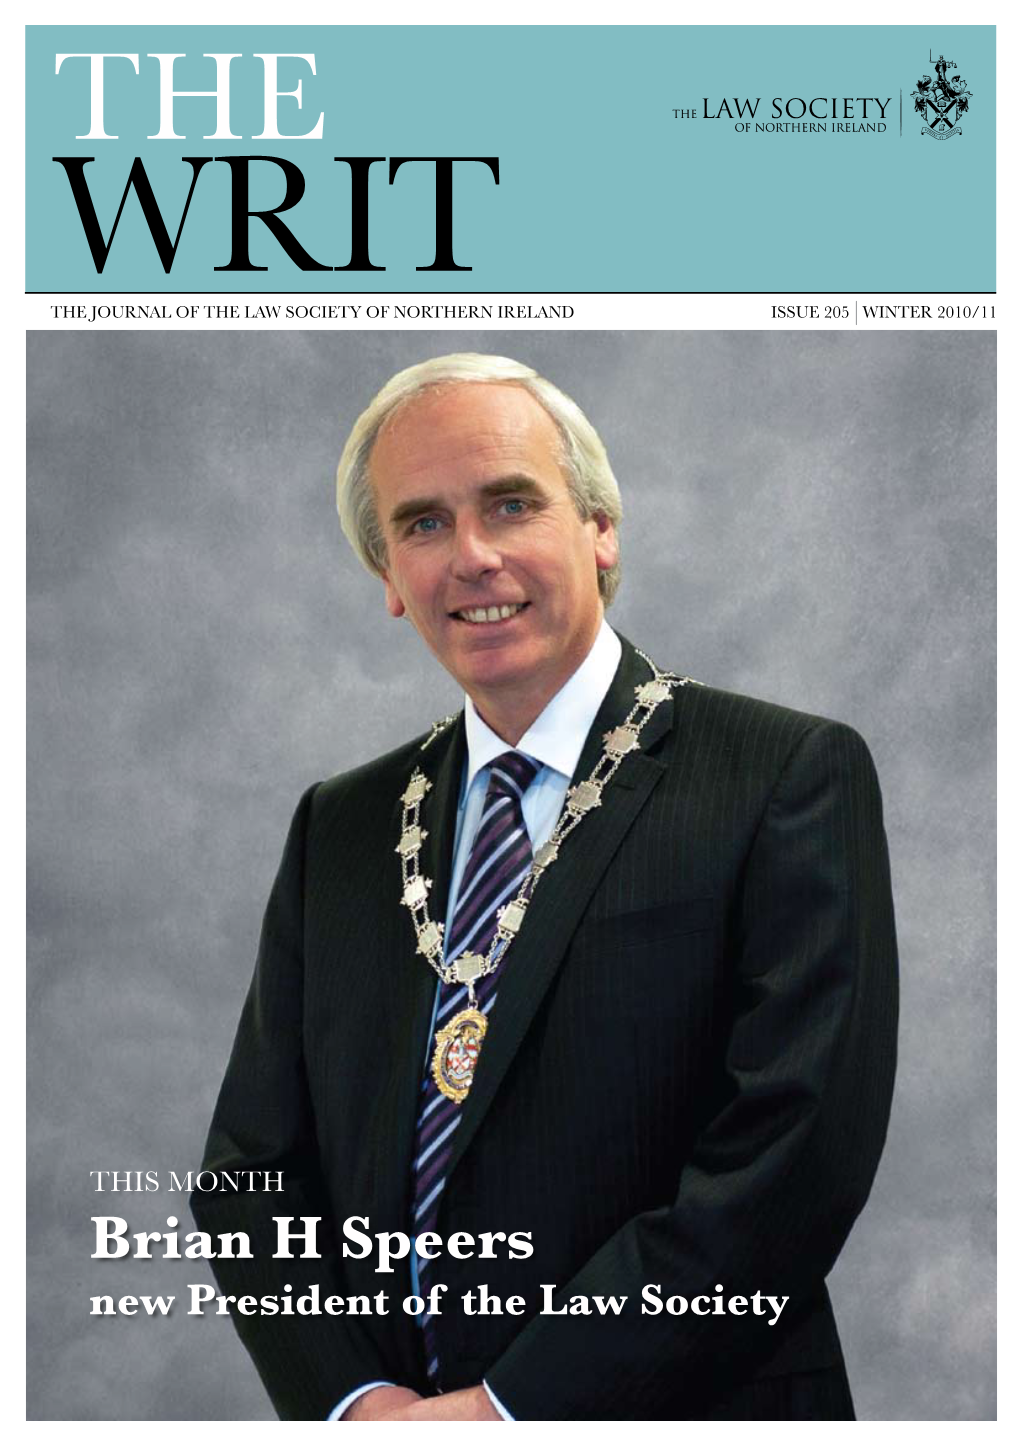 Writ the Journal of the Law Society of Northern Ireland Issue 205 Winter 2010/11